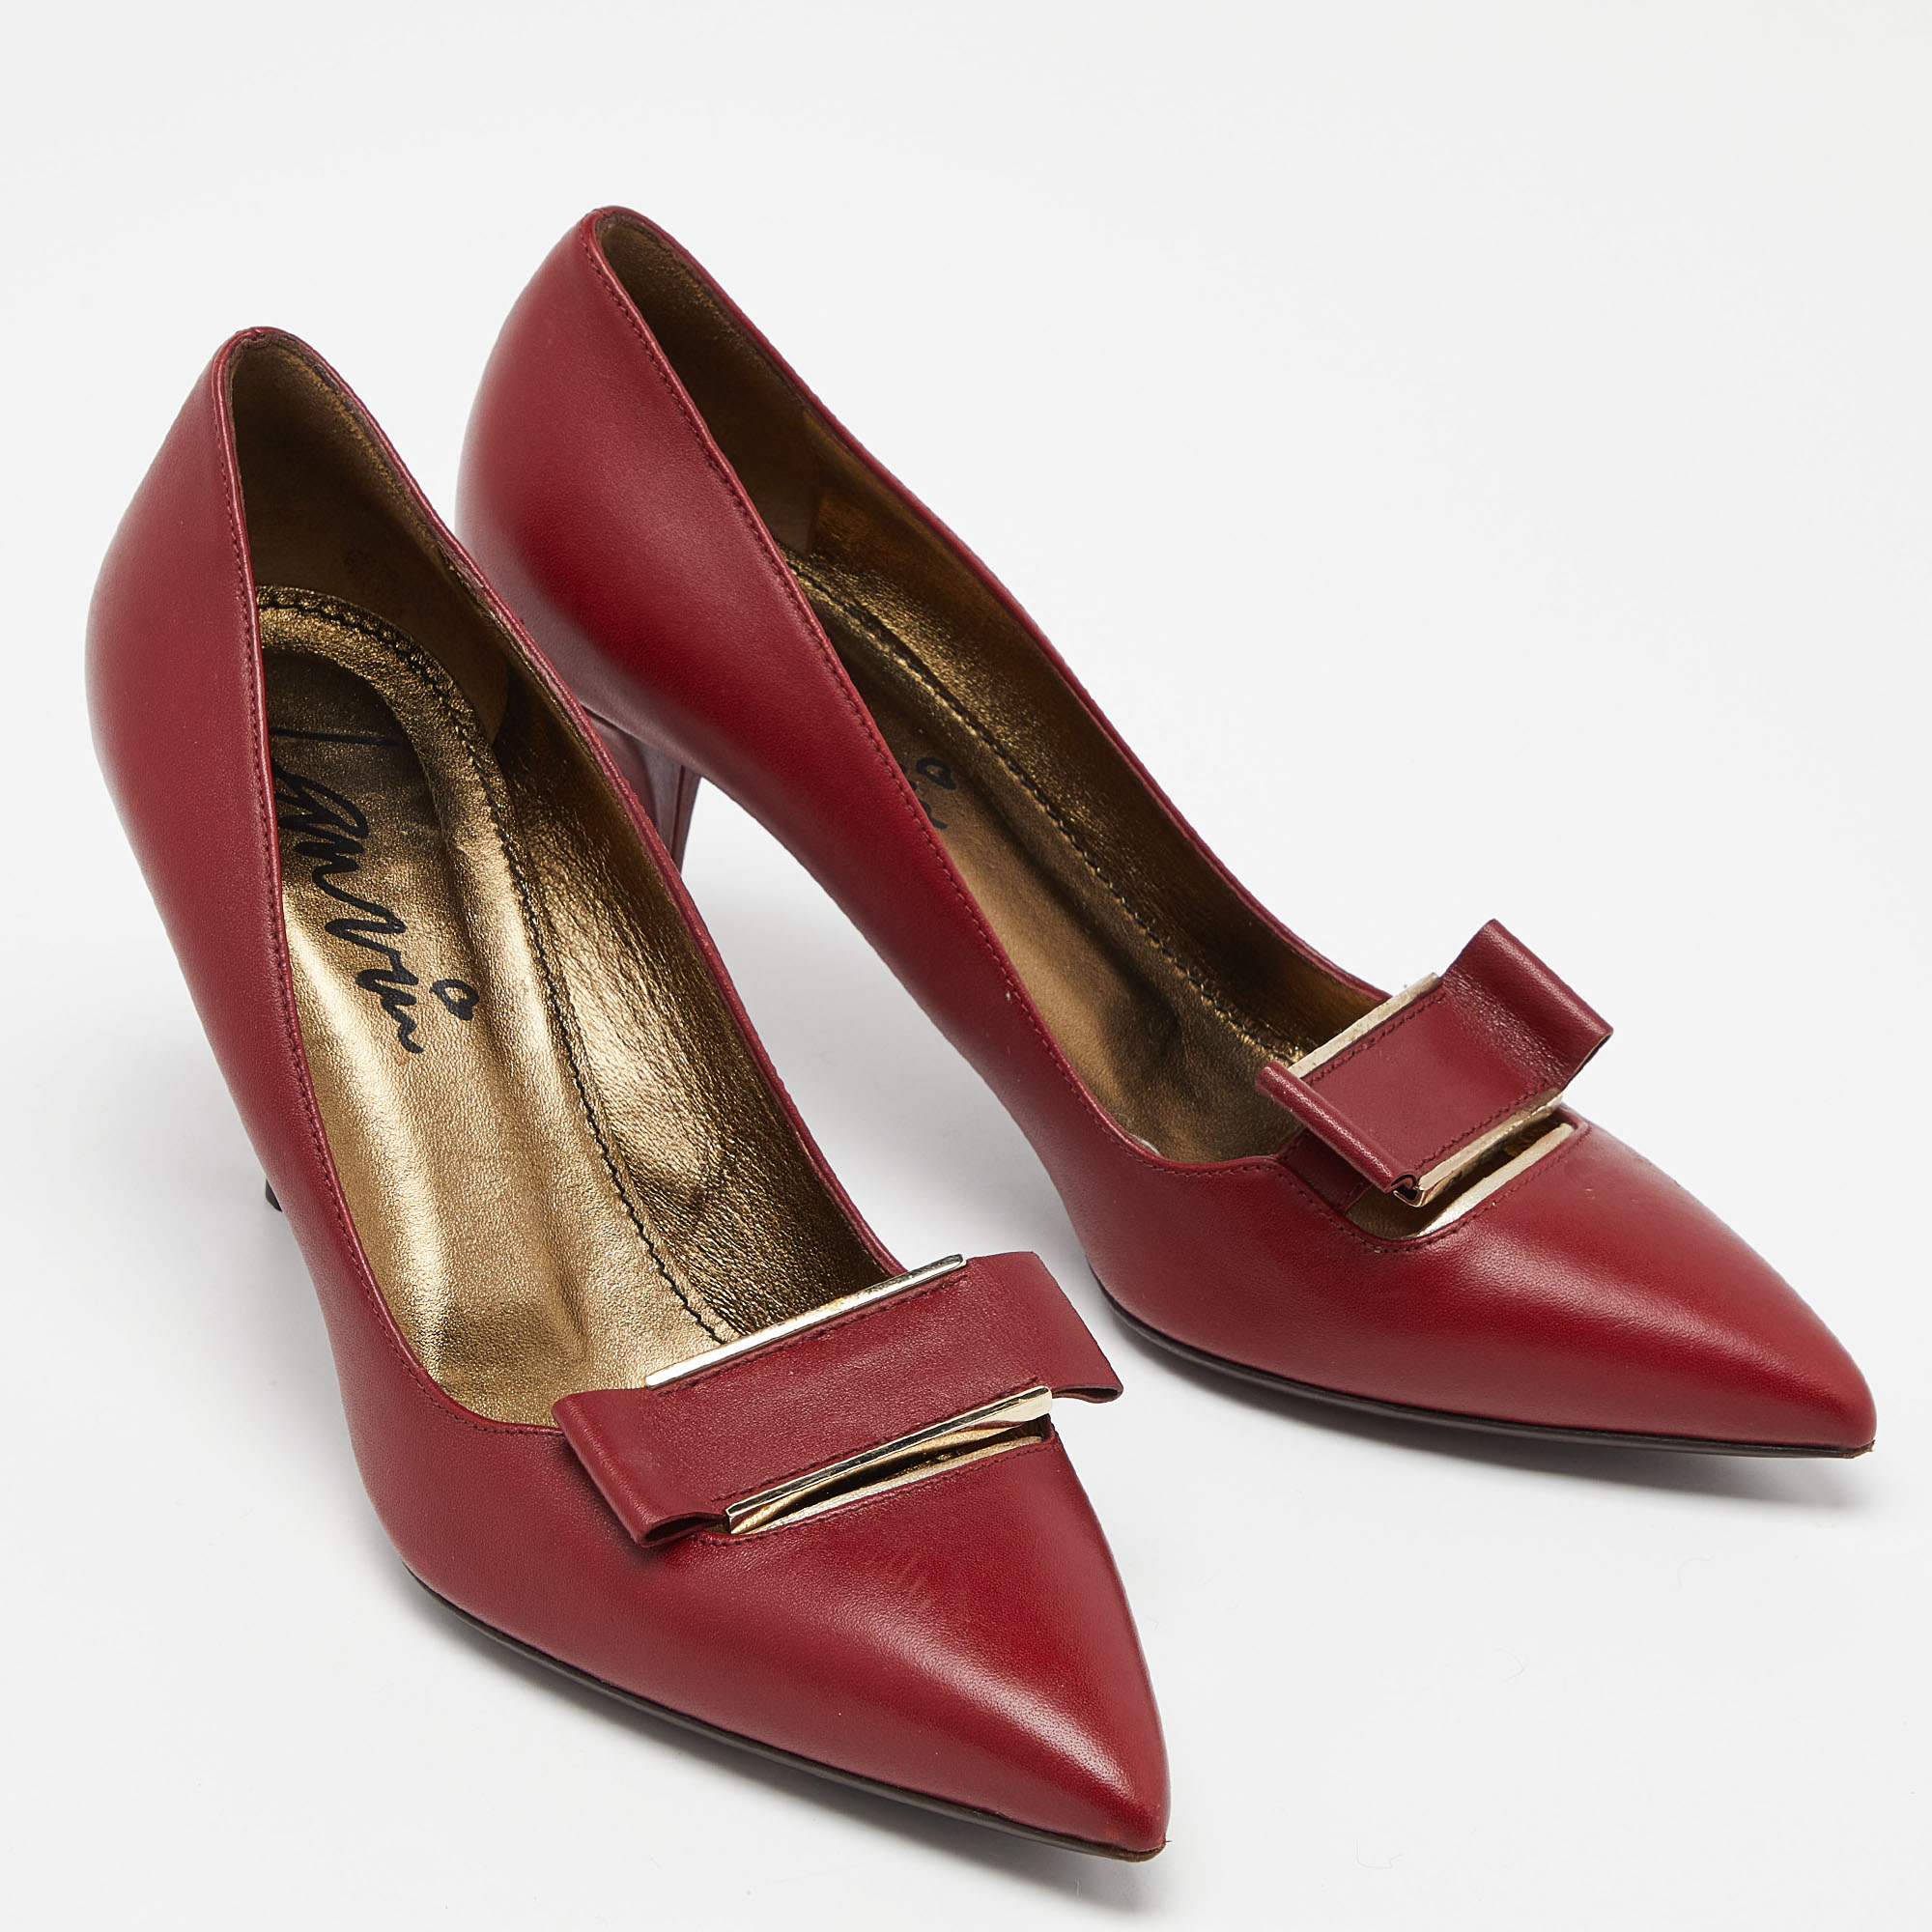 Lanvin Red Leather Bow Pointed Toe Pumps Size 39